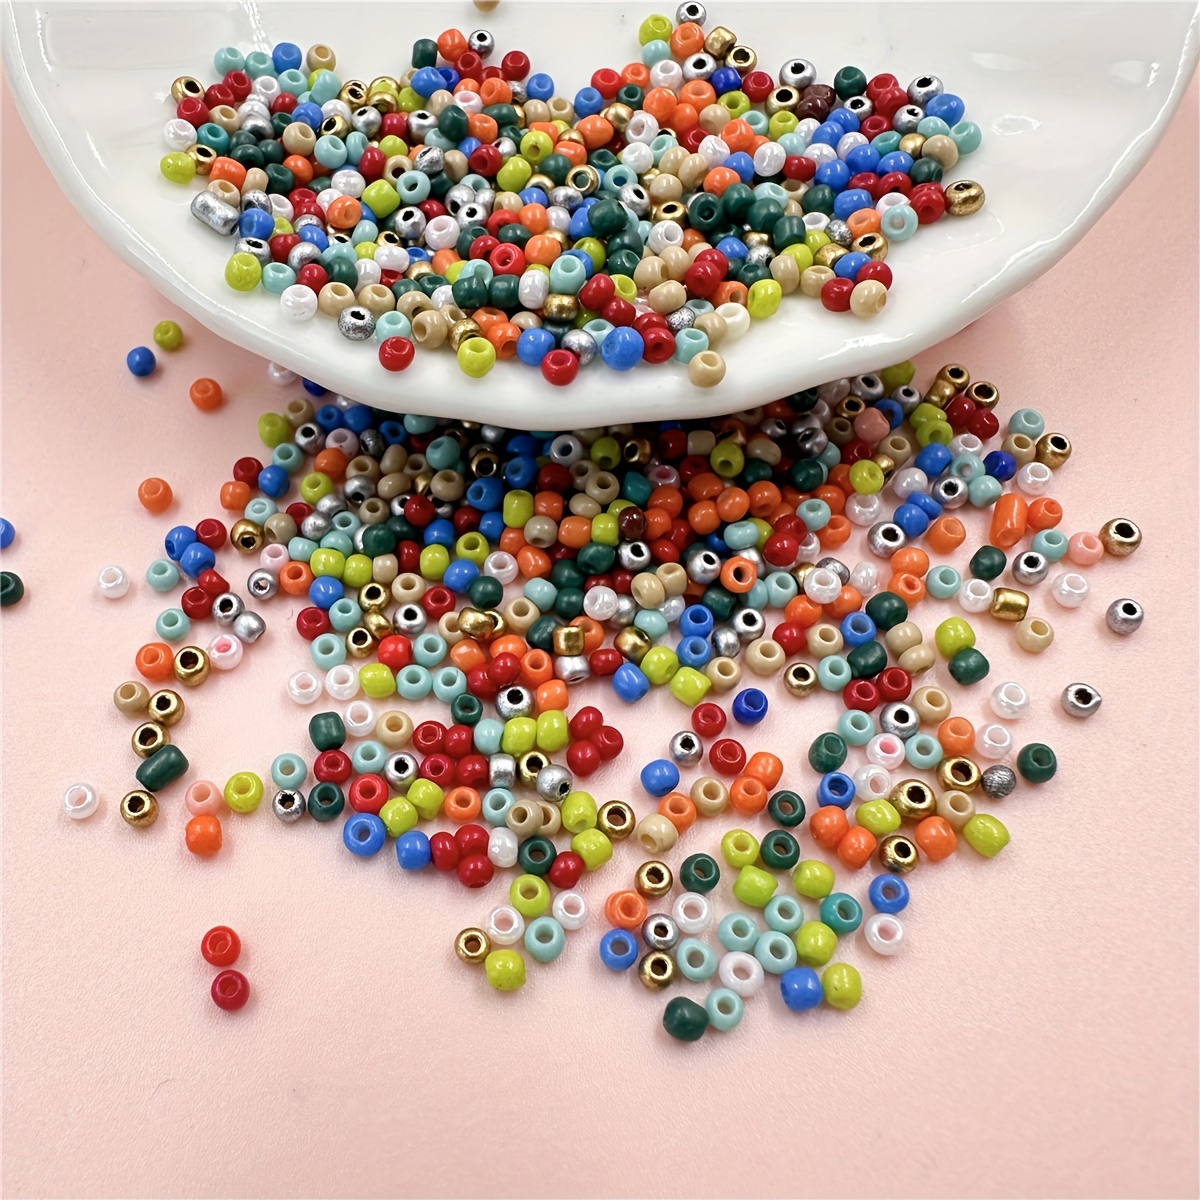 14400pcs Glass Seed Beads for Jewelry Making Kit, 120 Colors 4mm